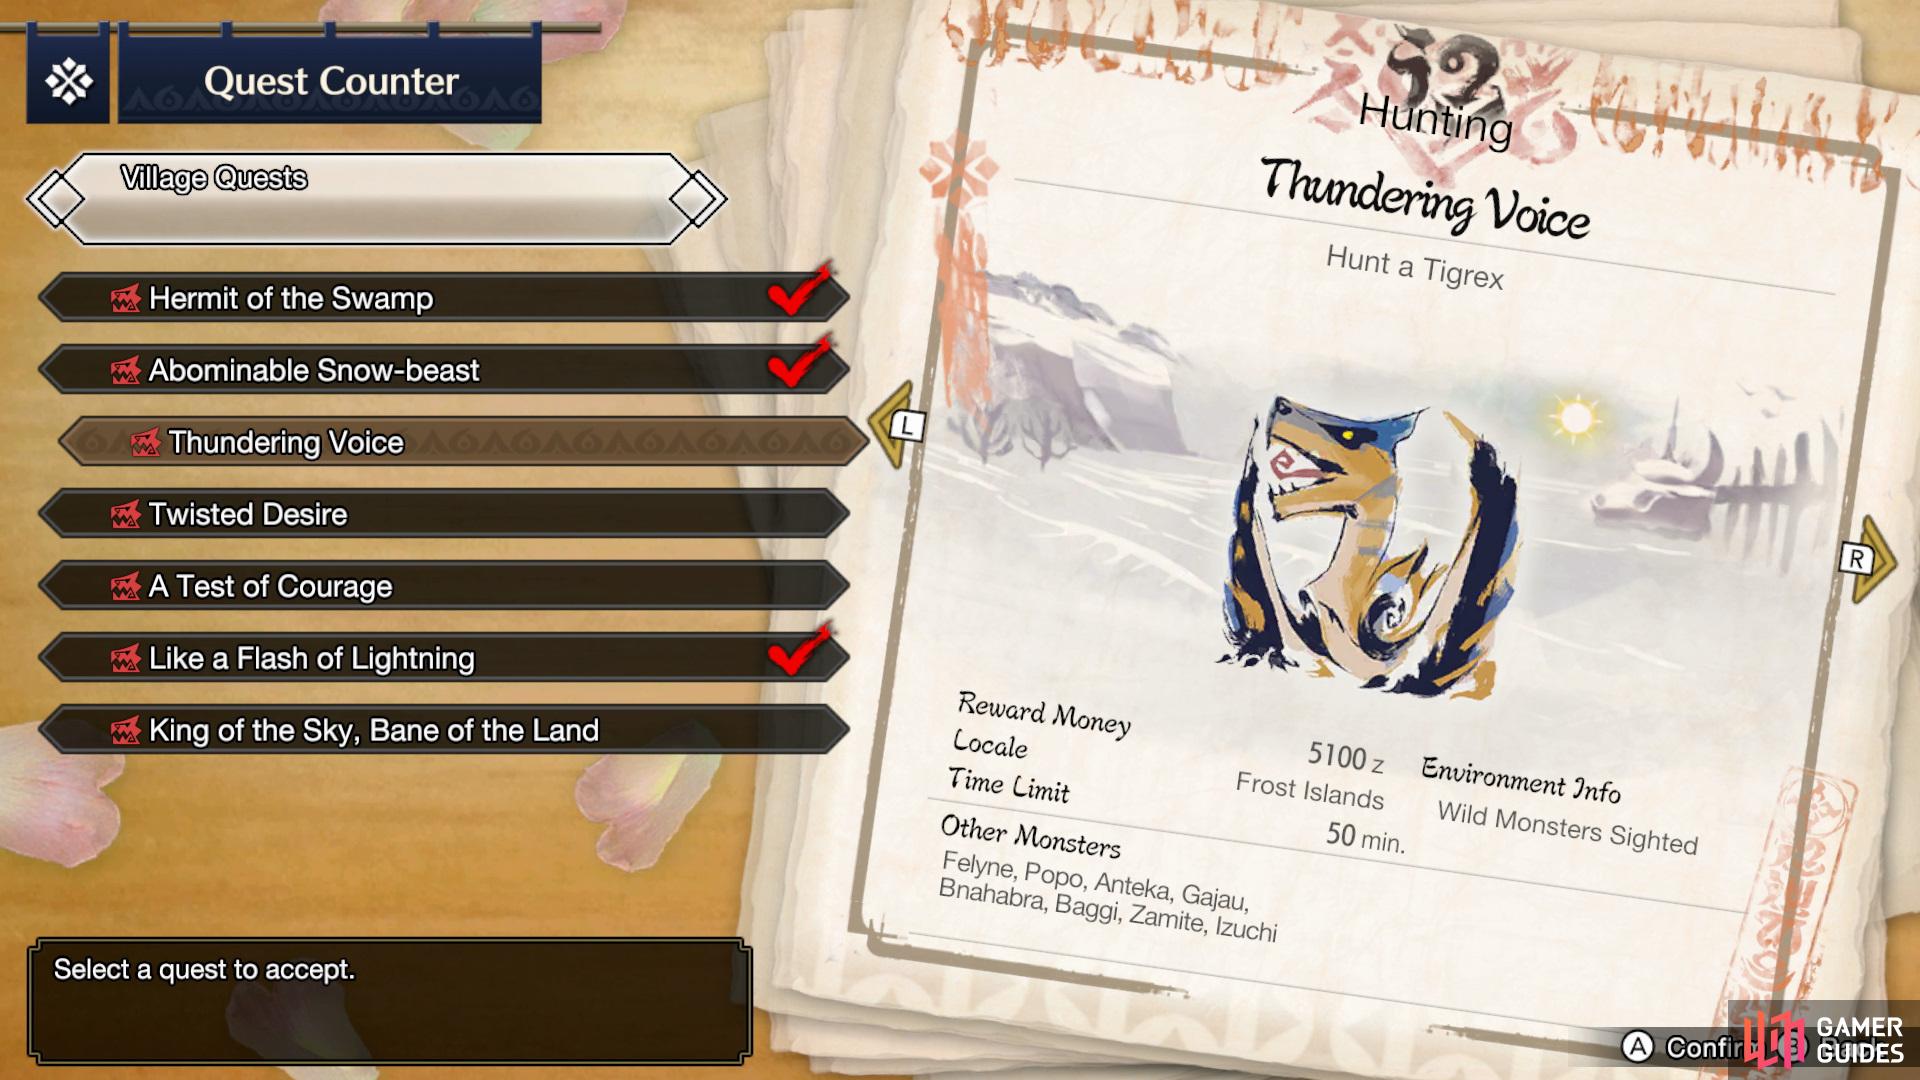 The Thundering Voice quest becomes available when you reach 6* Village Quests.